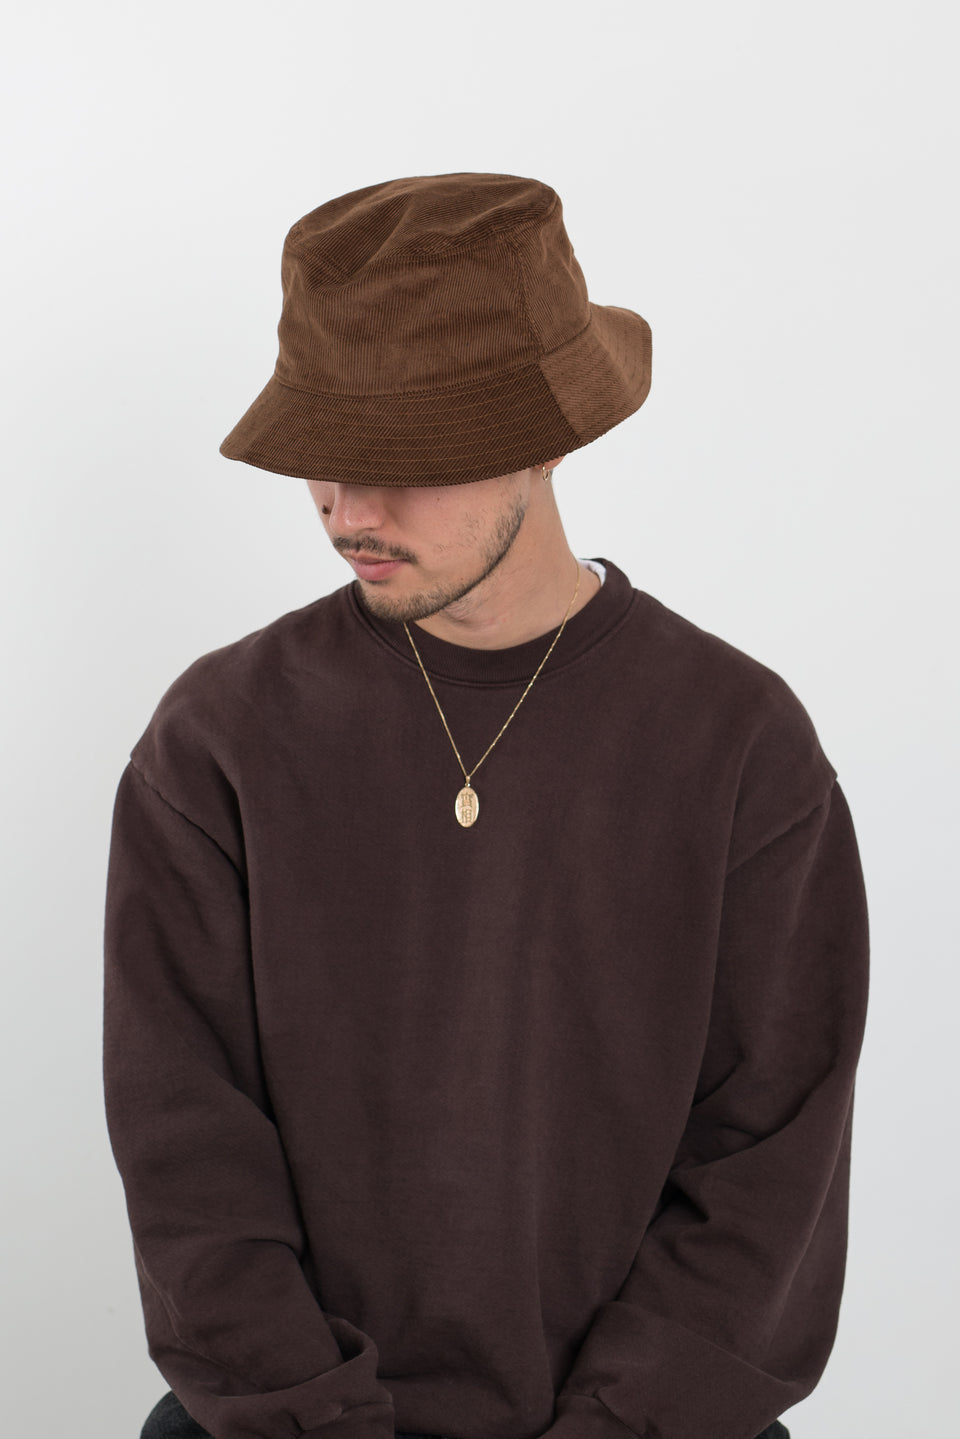 Found Feather Japan FW22 New Bucket Hat Cotton Corduroy Brown Calculus Victoria BC Canada